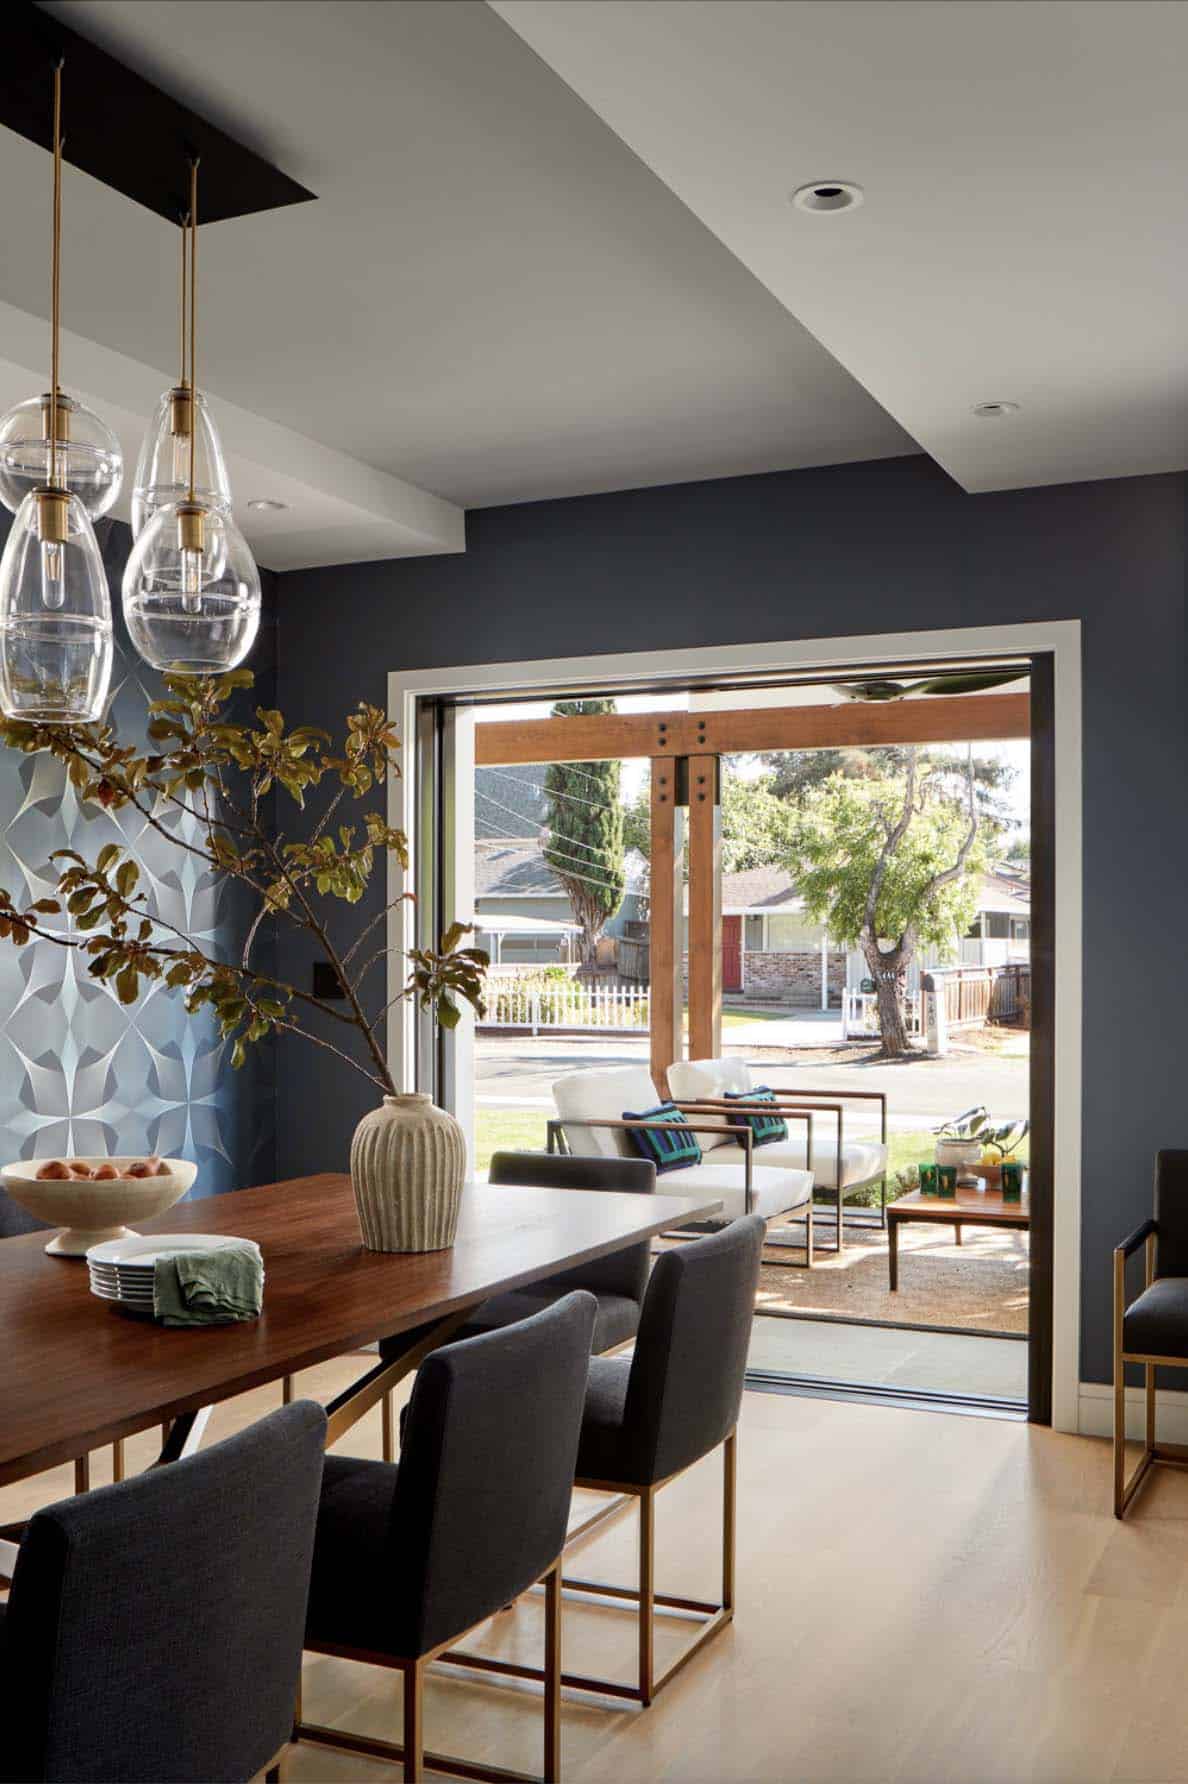 transitional dining room with sliding glass doors leading to the backyard patio